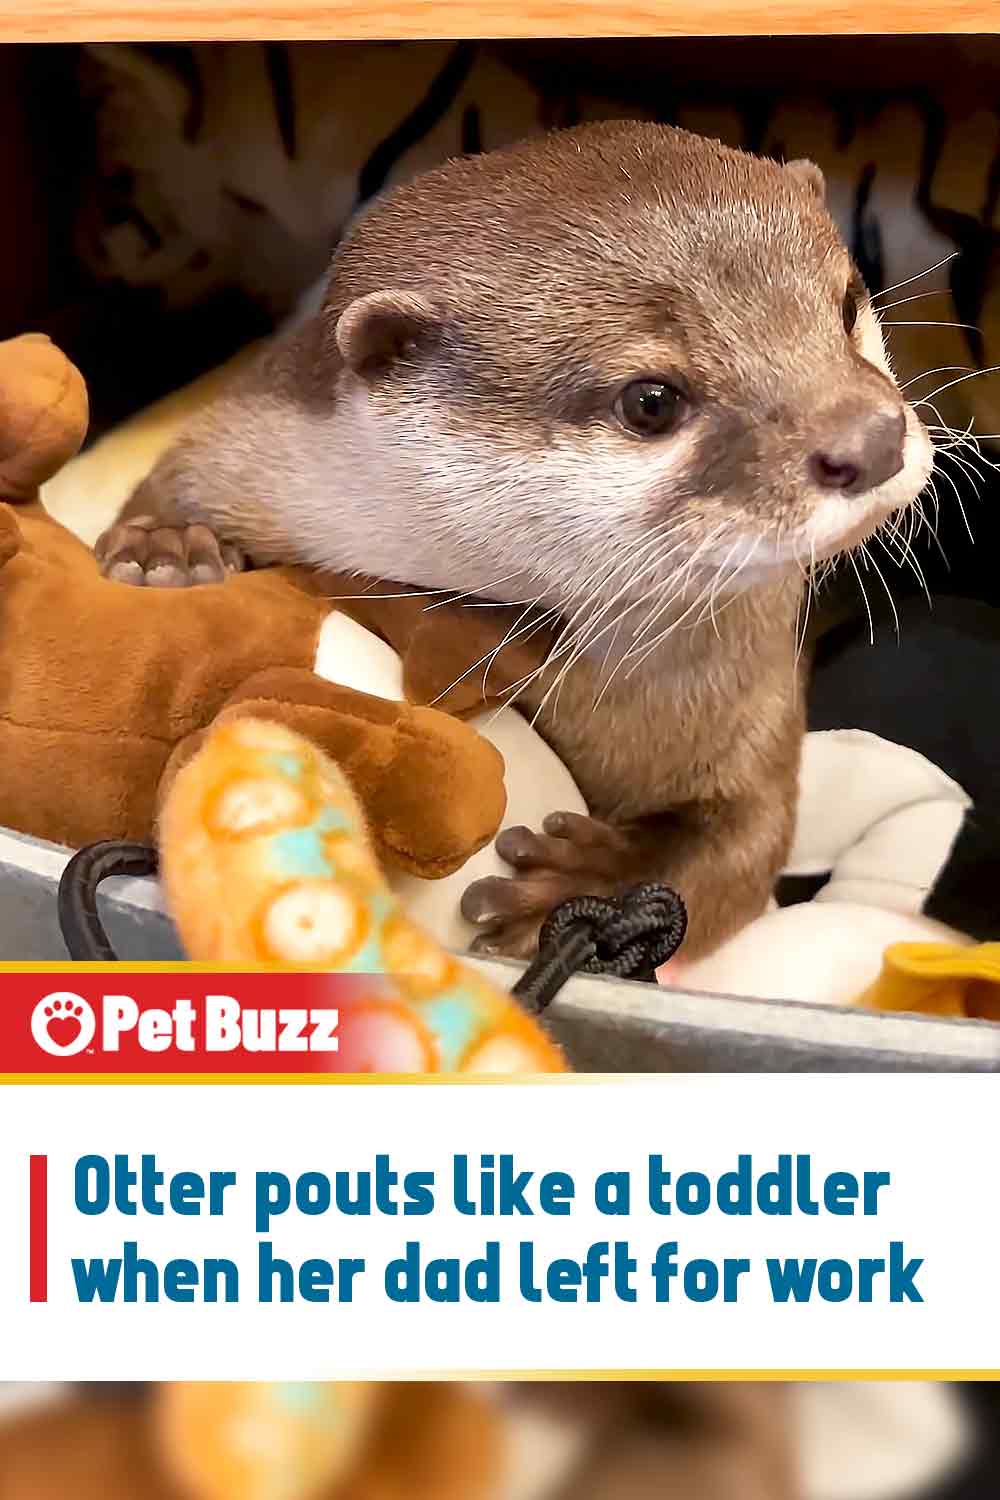 Otter pouts like a toddler when her dad left for work